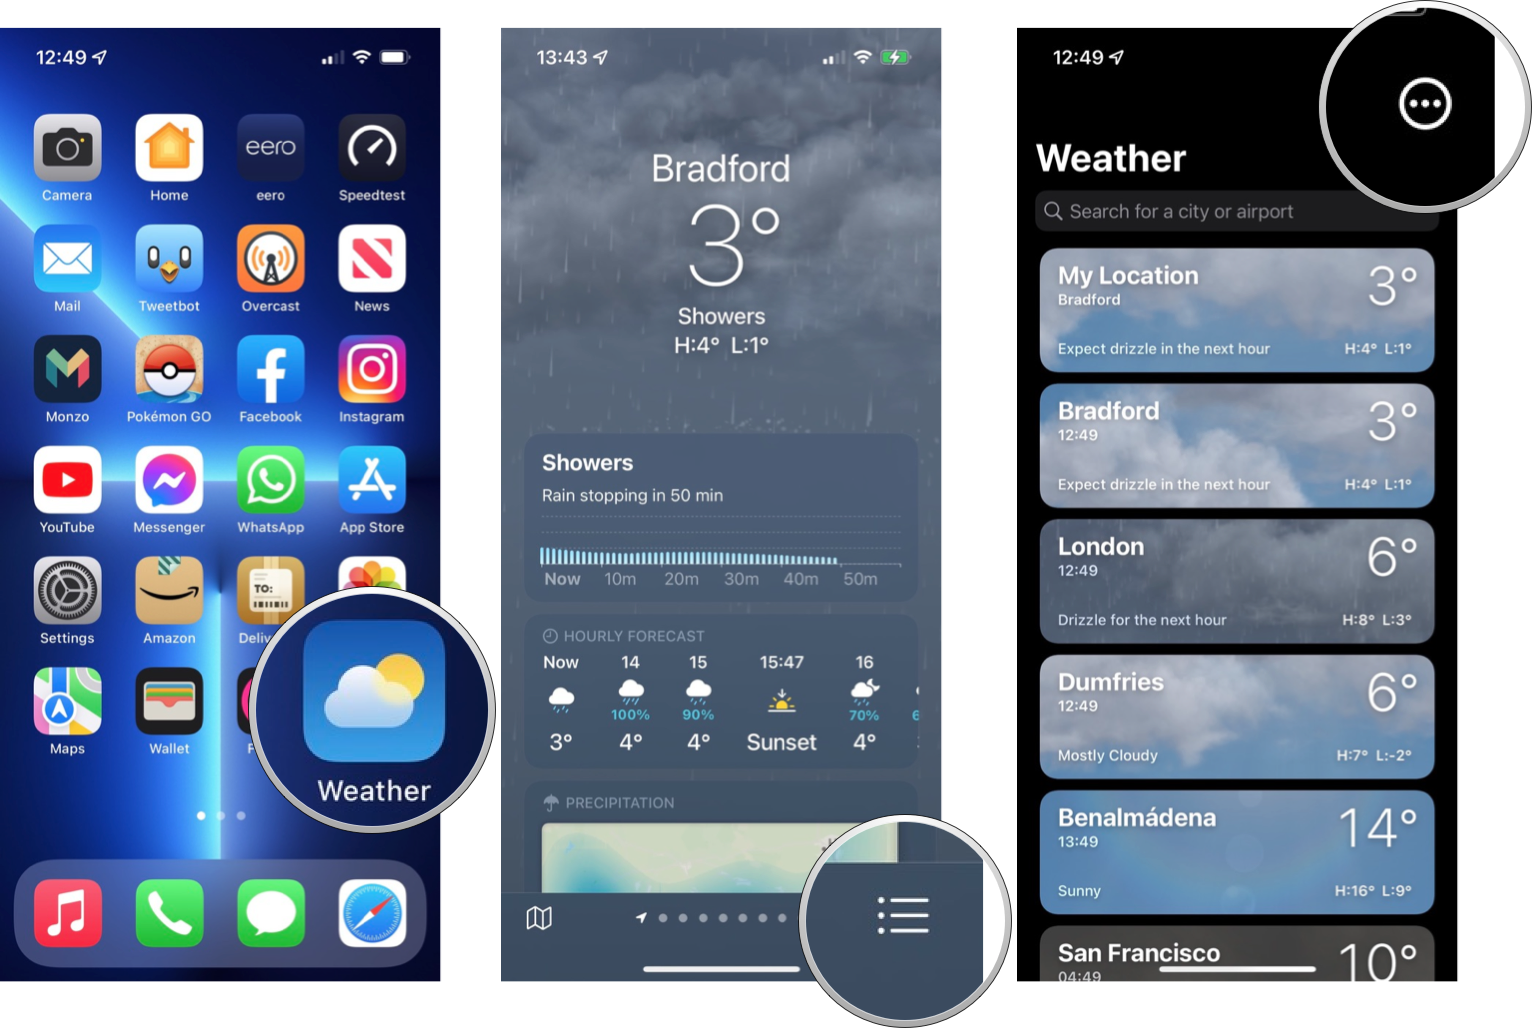 How to turn on rainfall notifications for the Weather app: Open Weather, tap the bulleted icon, tap the ellipse icon